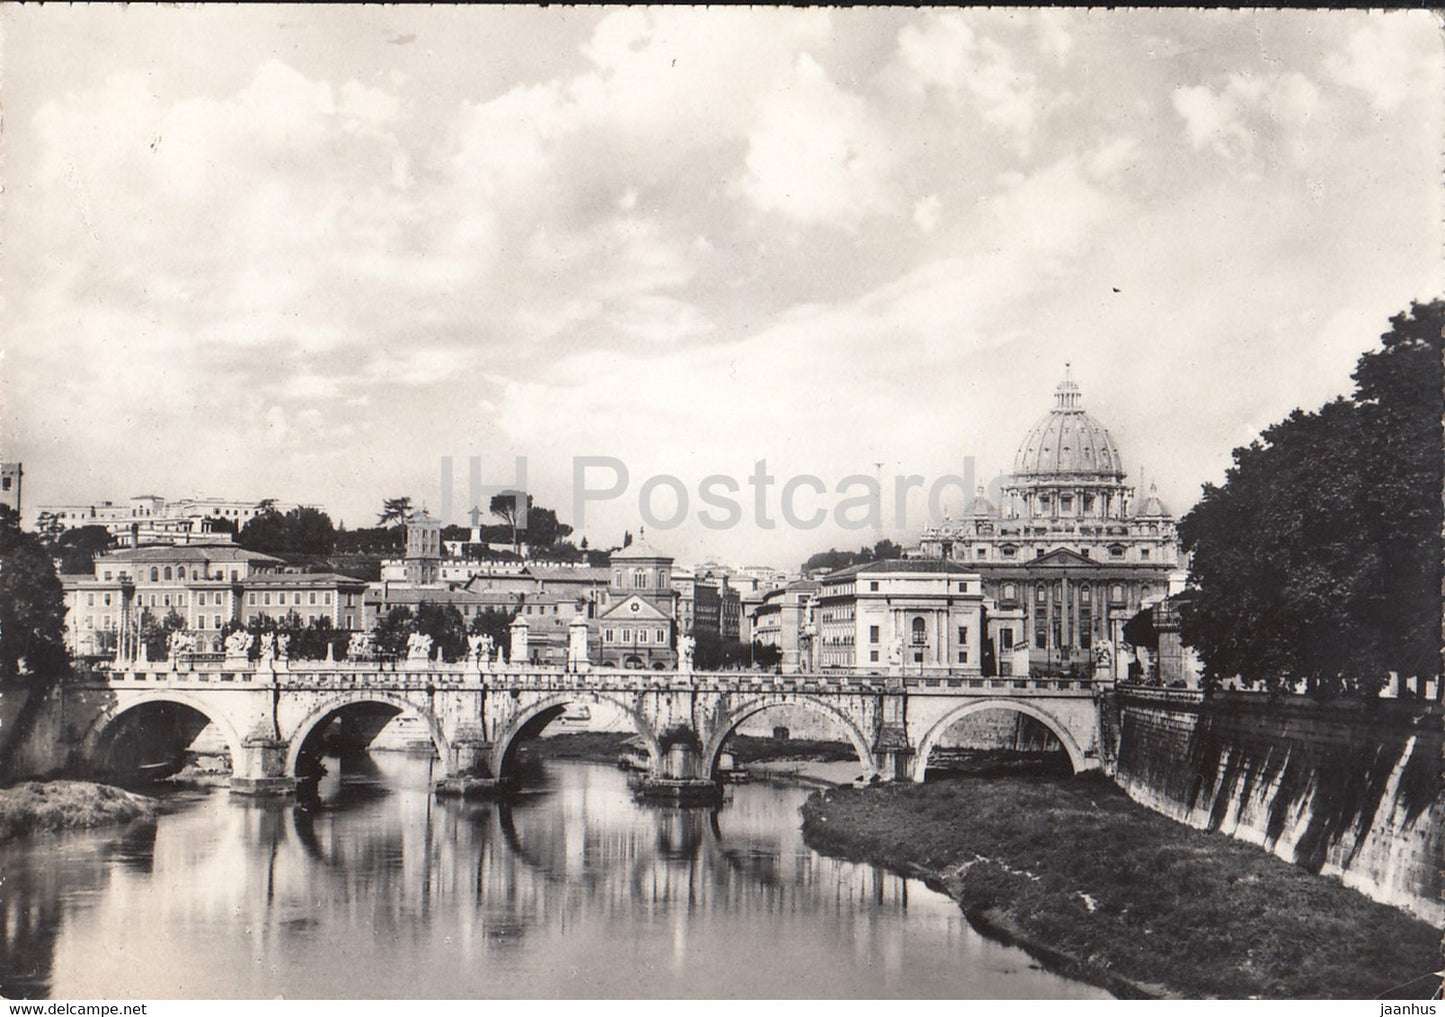 Roma - Rome - Ponte S Angelo e S Pietro - St Angel Bridge and St Peter - old postcard - 1950 - Italy - used - JH Postcards